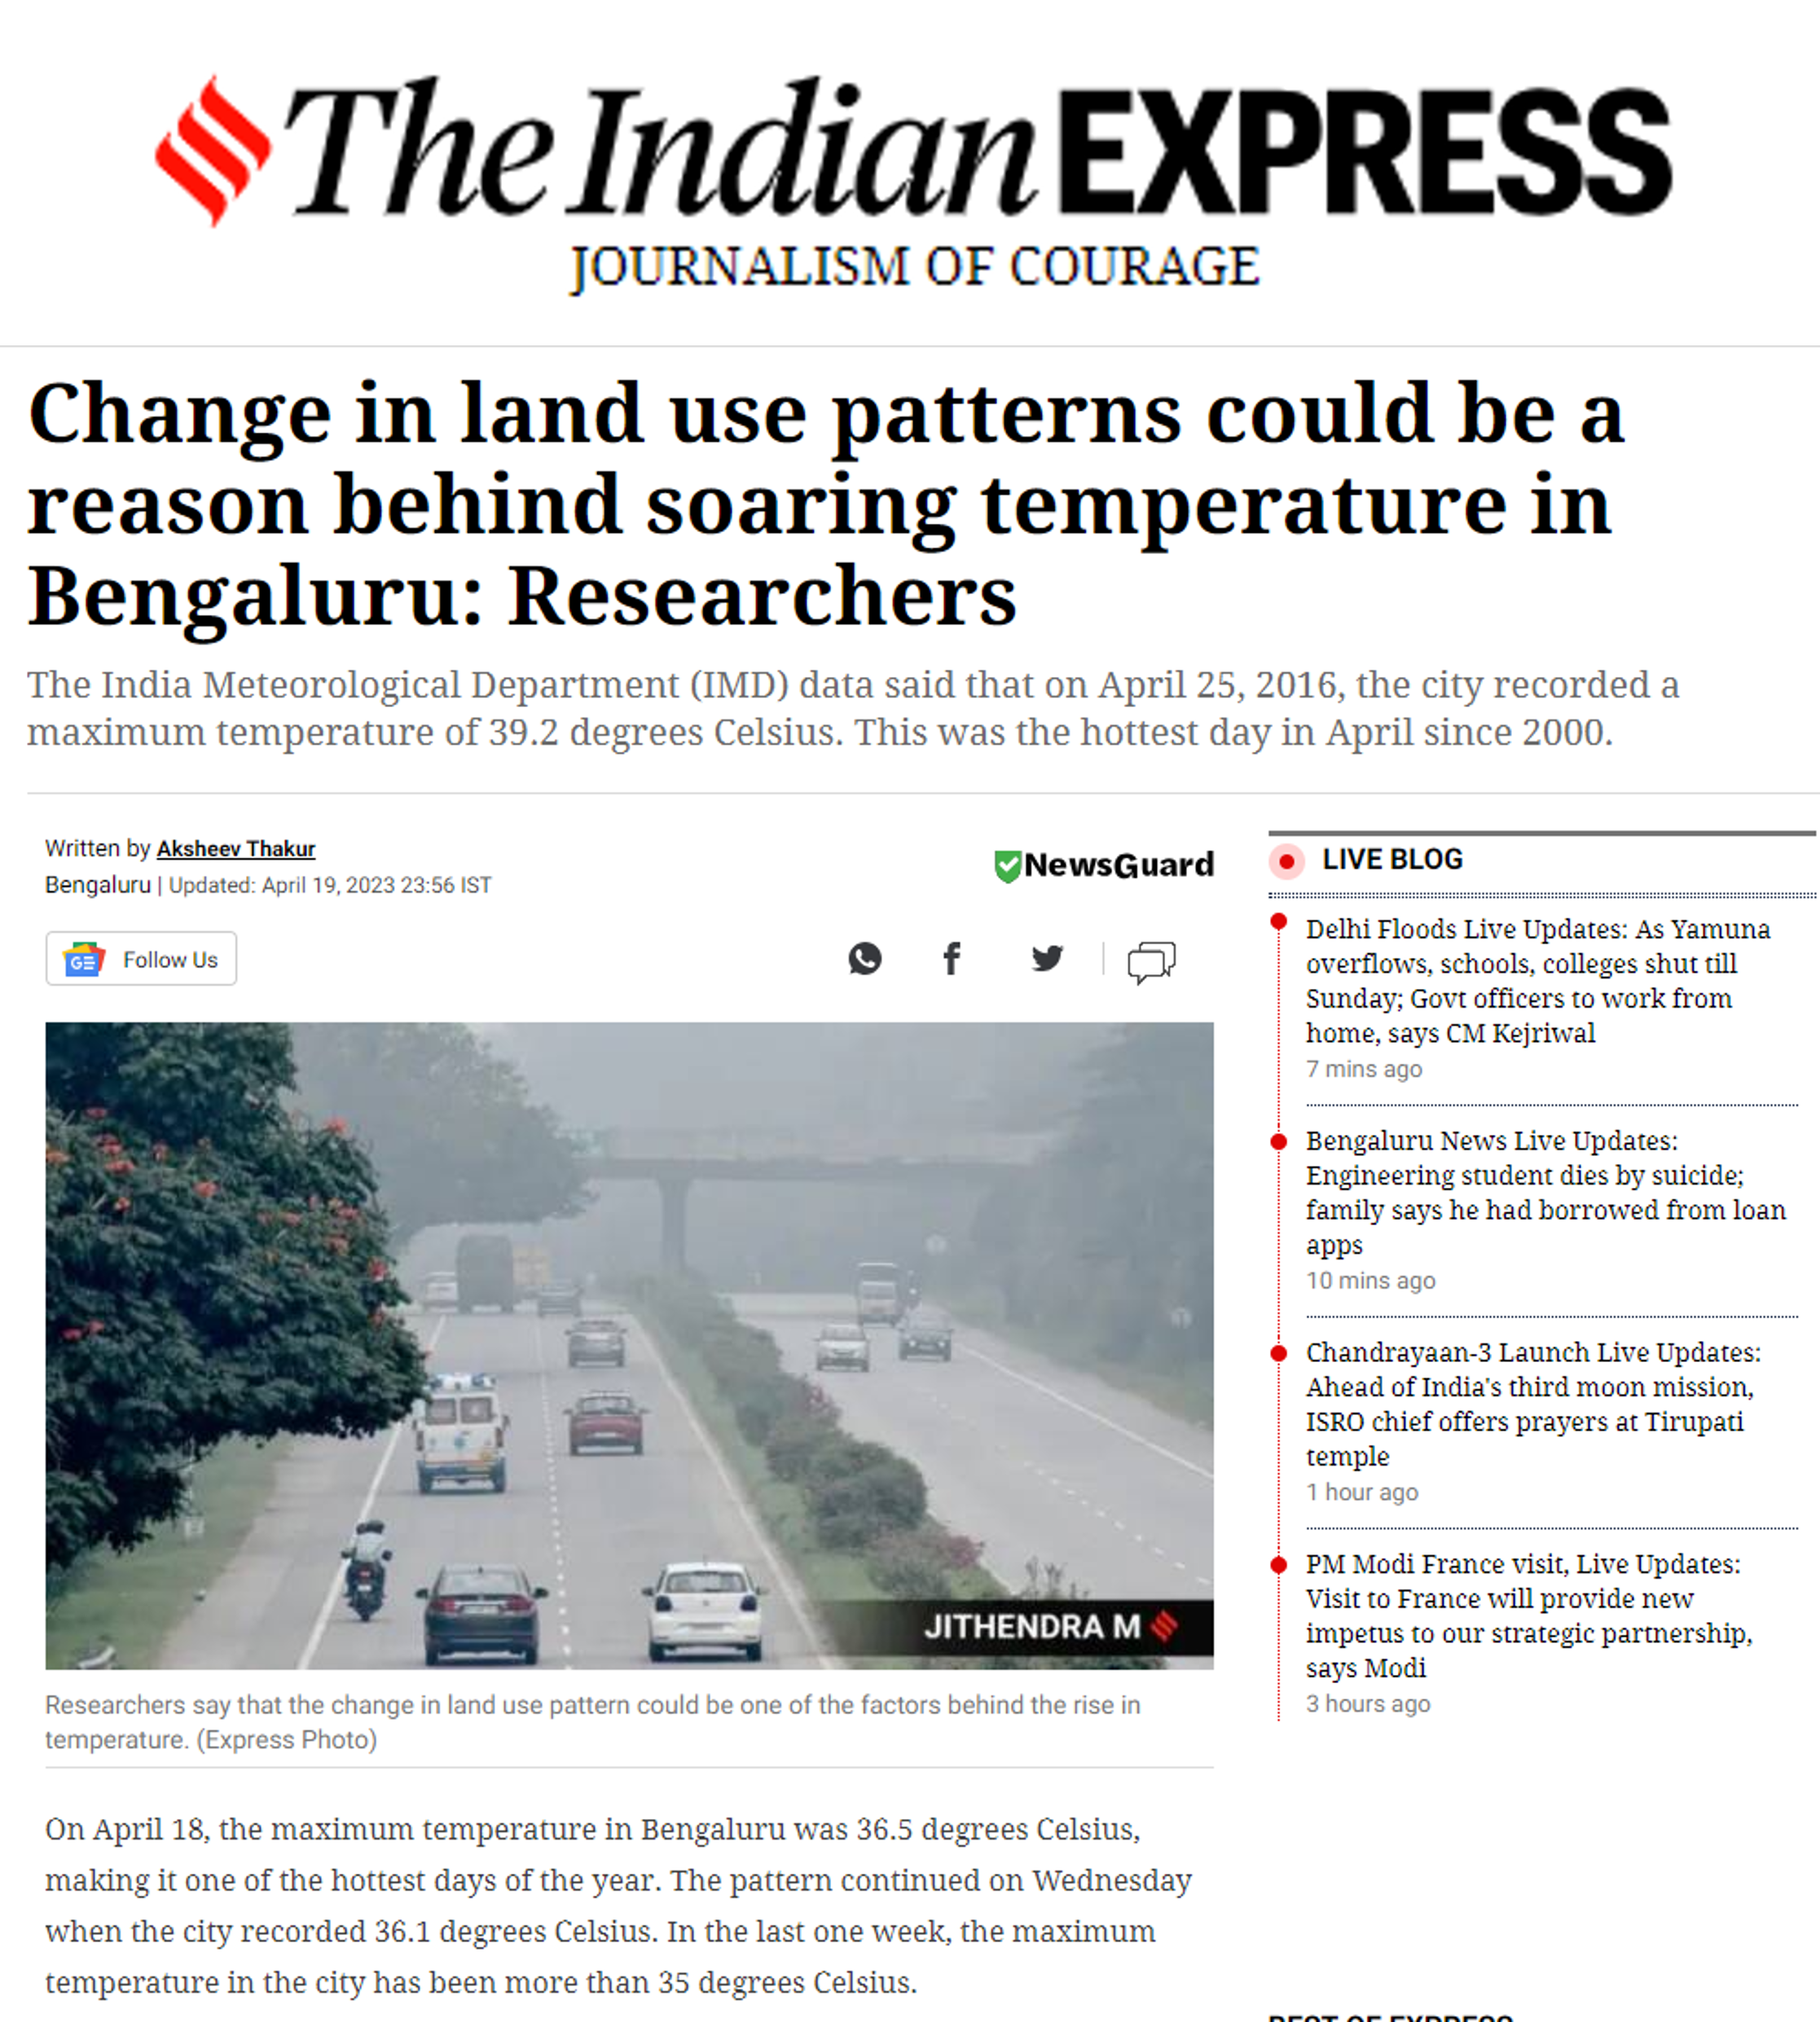 Dr Anushiya J quoted by The Indian Express on the impact of changes in land use patterns on Bengaluru temperature